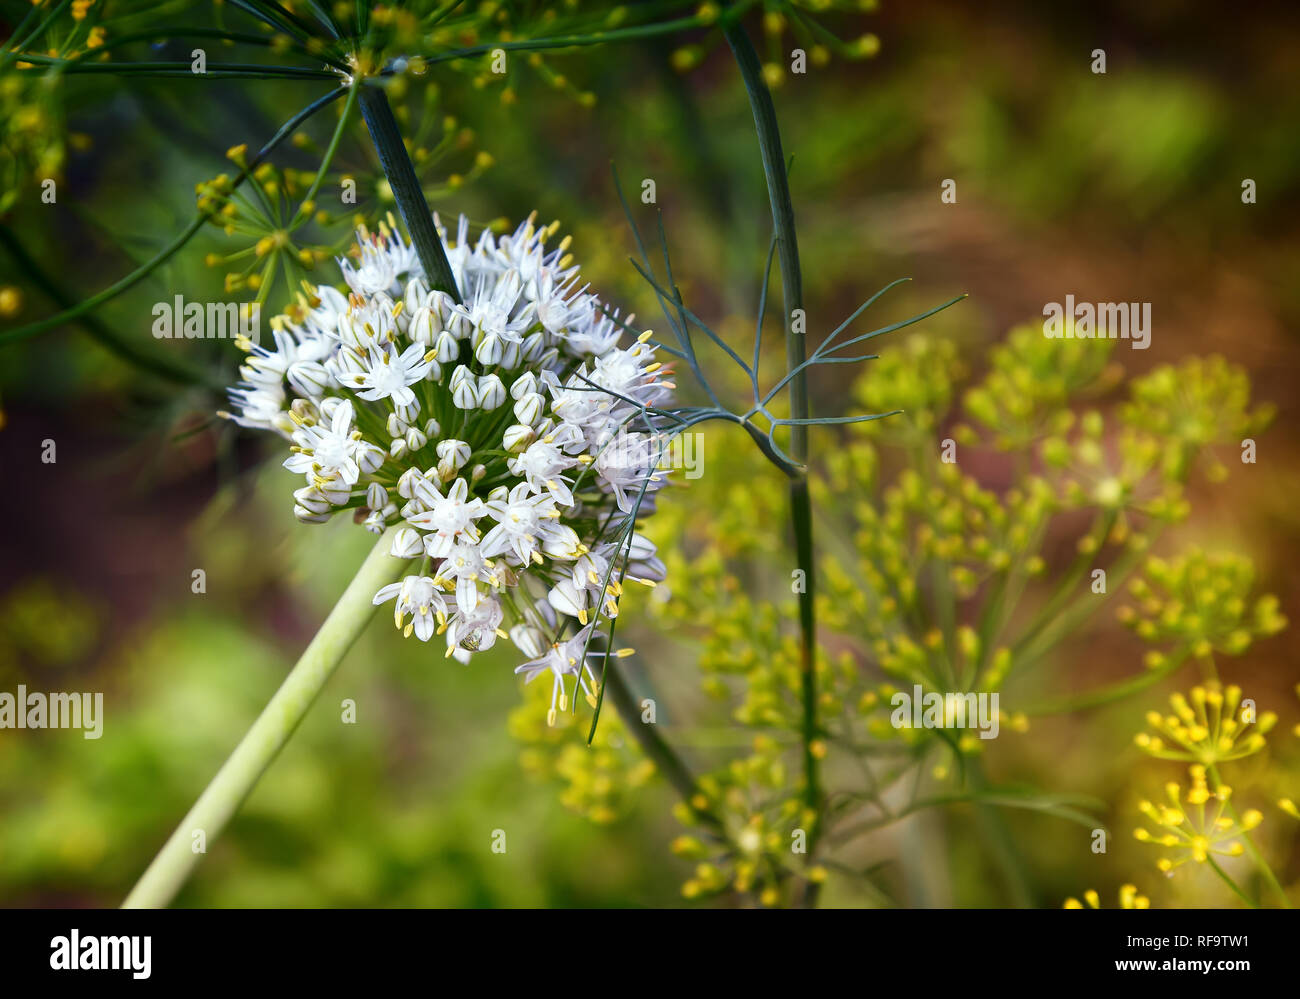 Inflorescence of flowering onions in the garden. Stock Photo